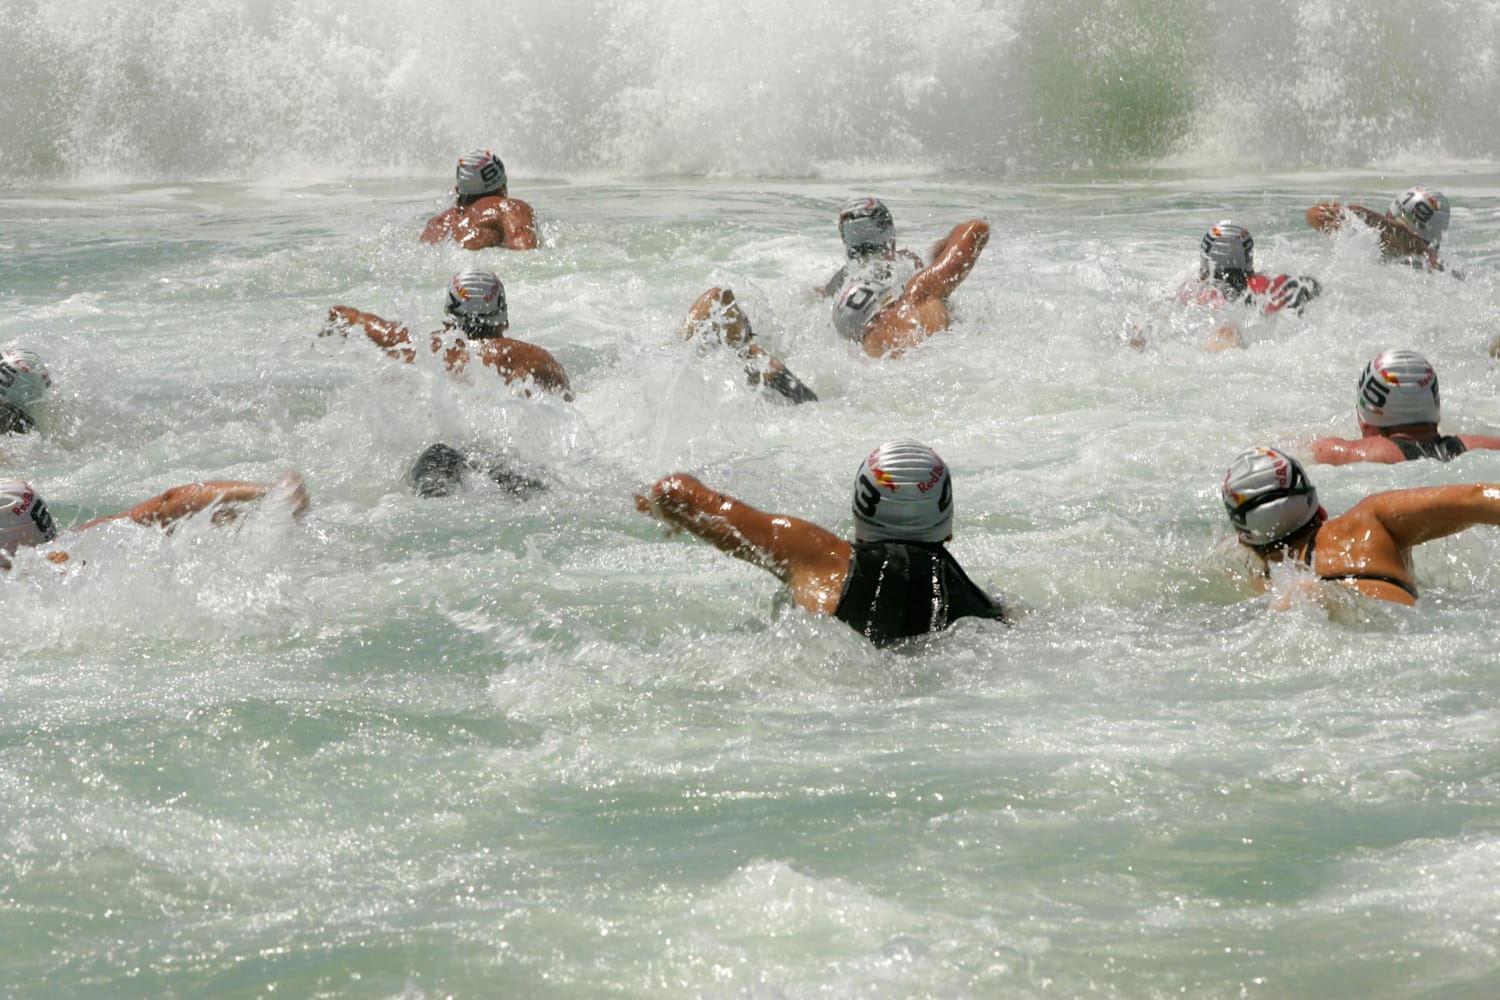 Lebanese Swimmer Ihab Chibani Just Won 1st Place At The Open Water